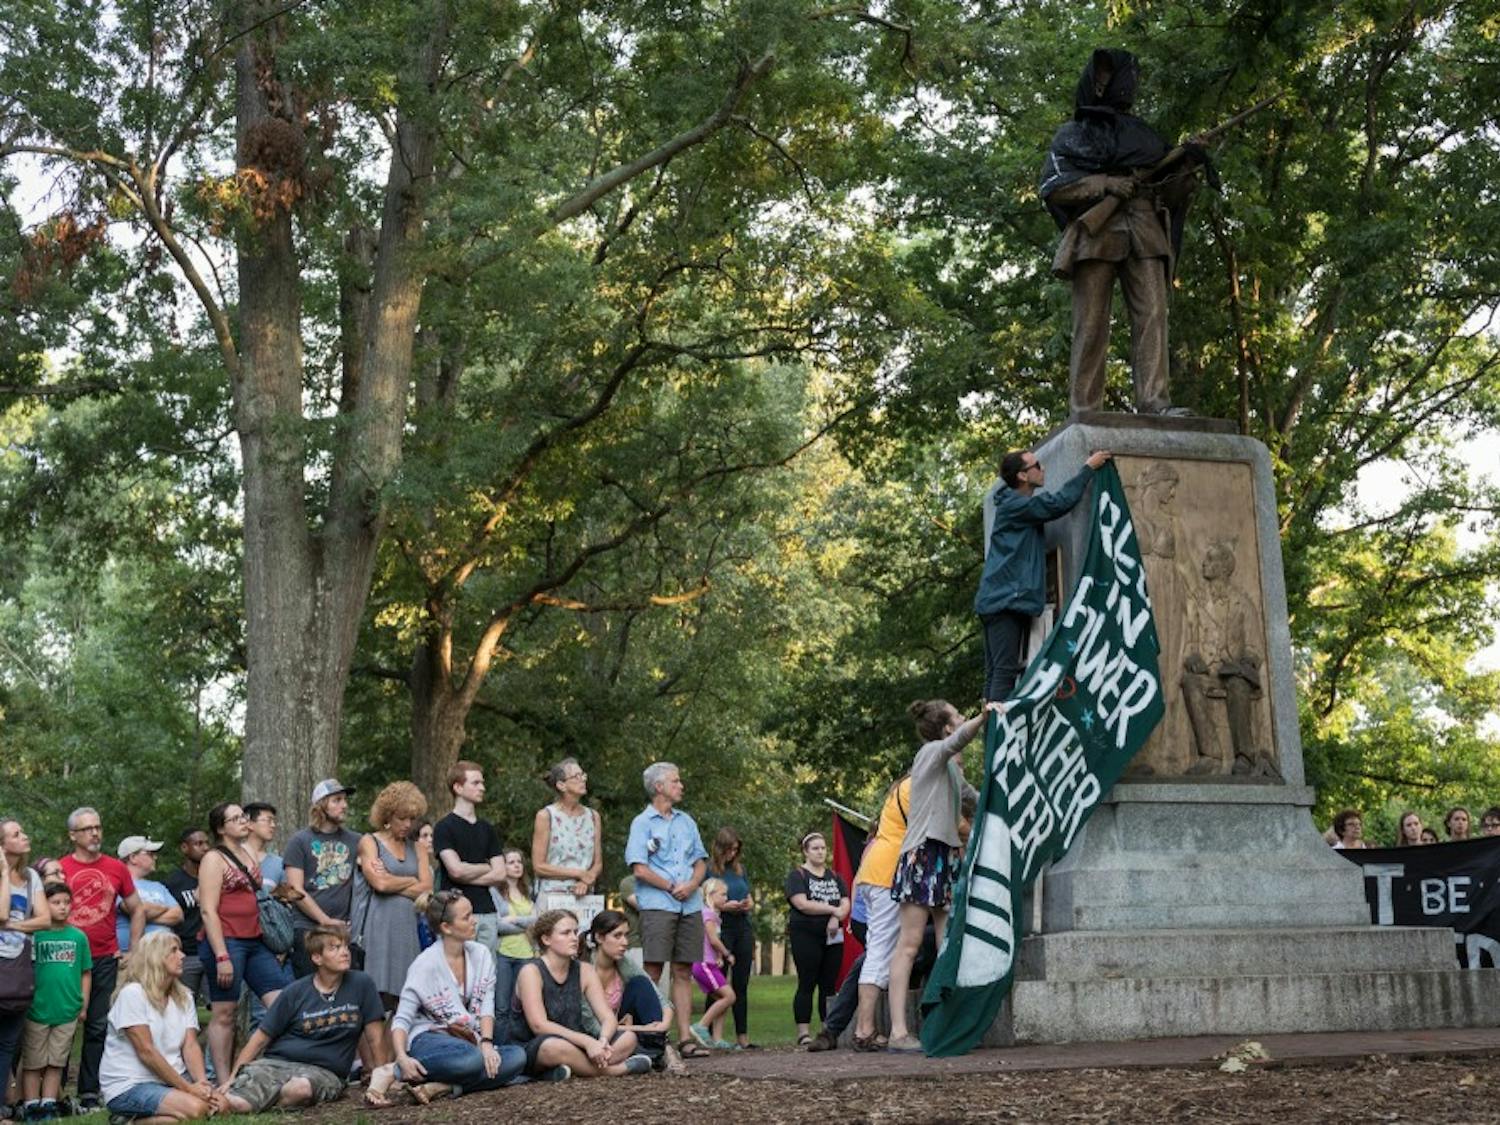 Chapel Hill residents and UNC students gathered on Sunday for a vigil in solidarity with victims of violence in Charlottesville.